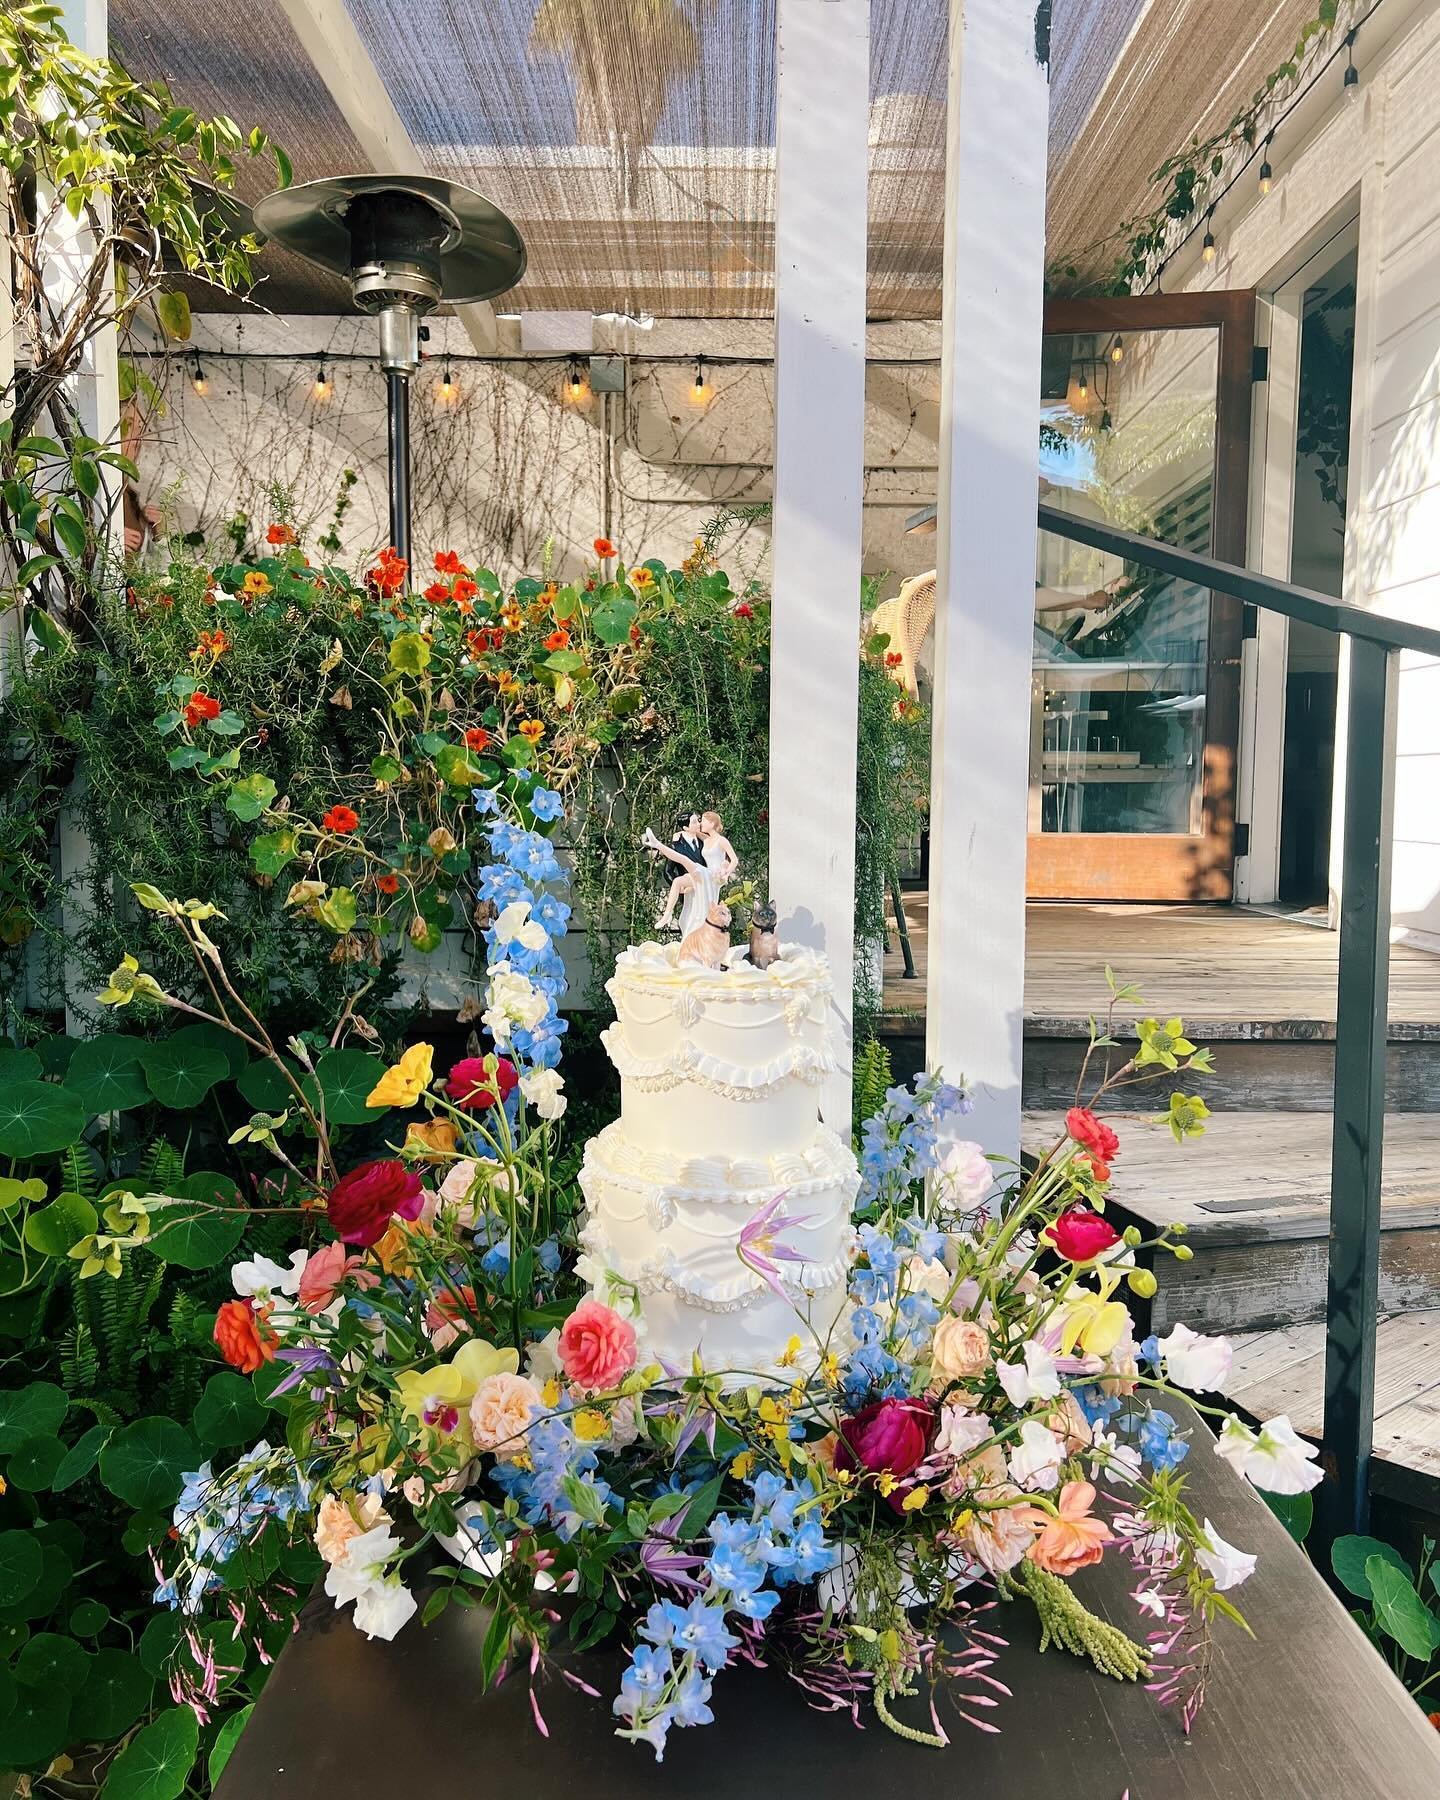 A moment for the cake 🍰 
The most important part of cake flowers is planning with the bakery to making that delicious piece of art shine. I chose the perfect half moon compotes to flip the ceremony floor arrangements for the cake garden and @lelepat